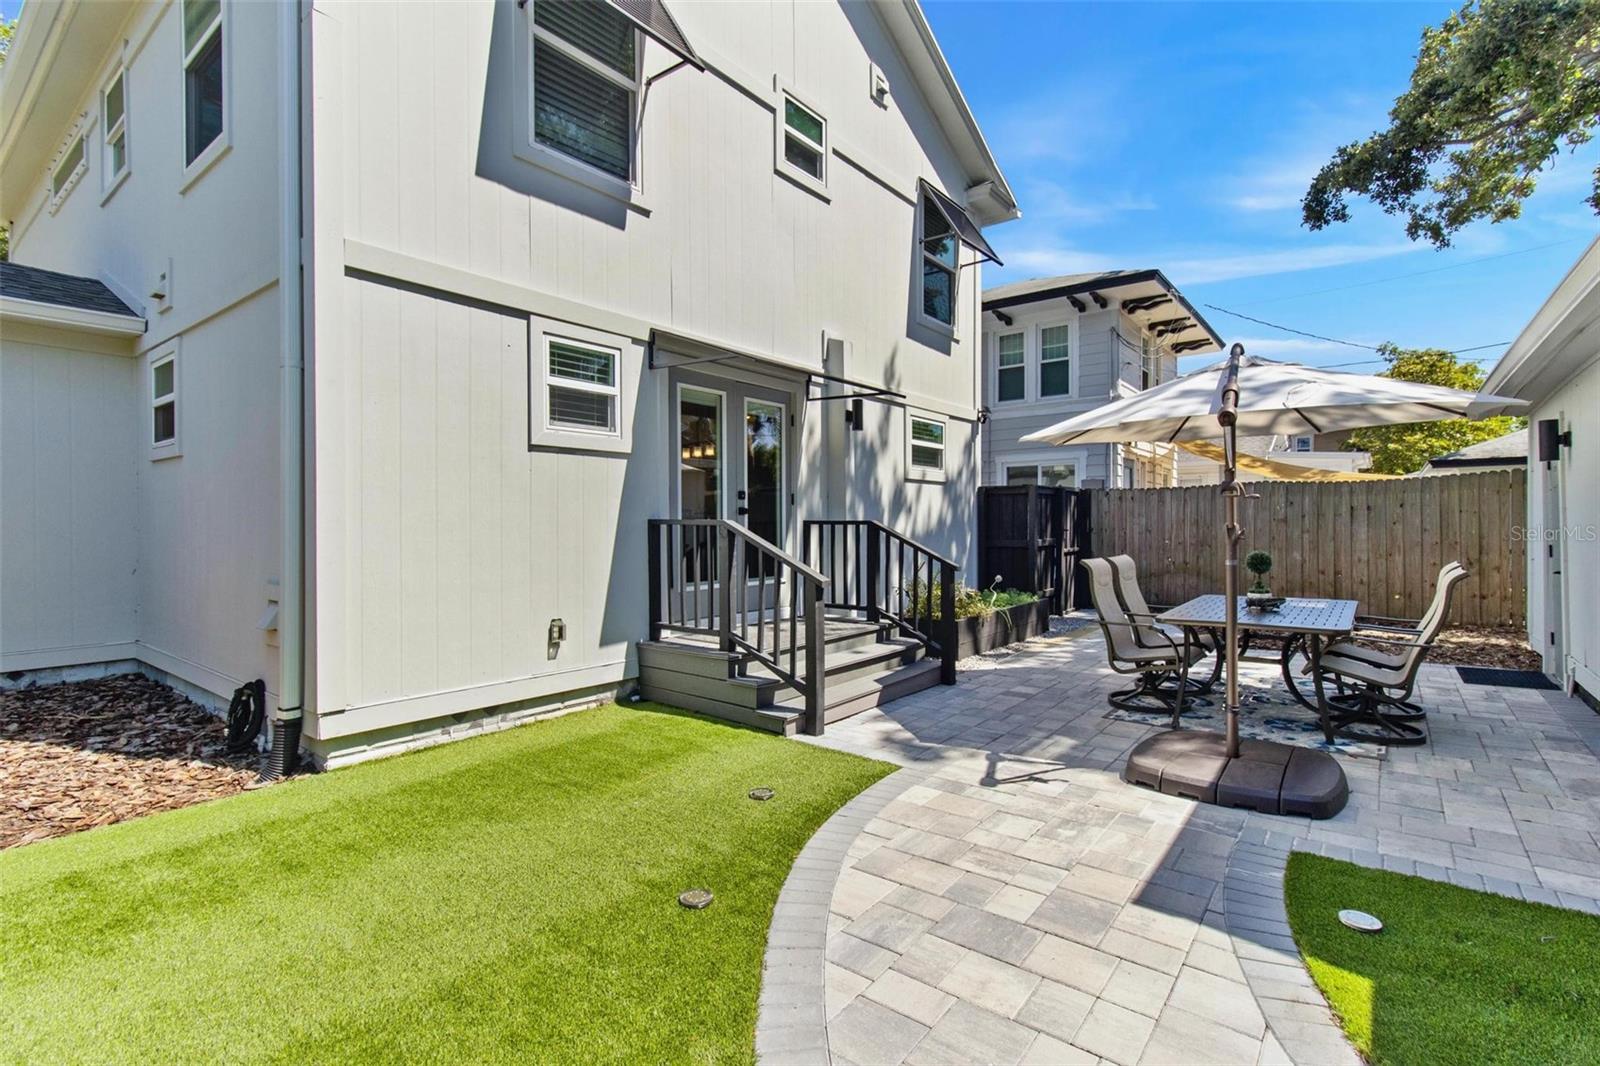 The backyard, between the home and the detached garage, has elegant pavers, artificial turf, raised herbs and vegetable garden, and has ample space to add a pool.